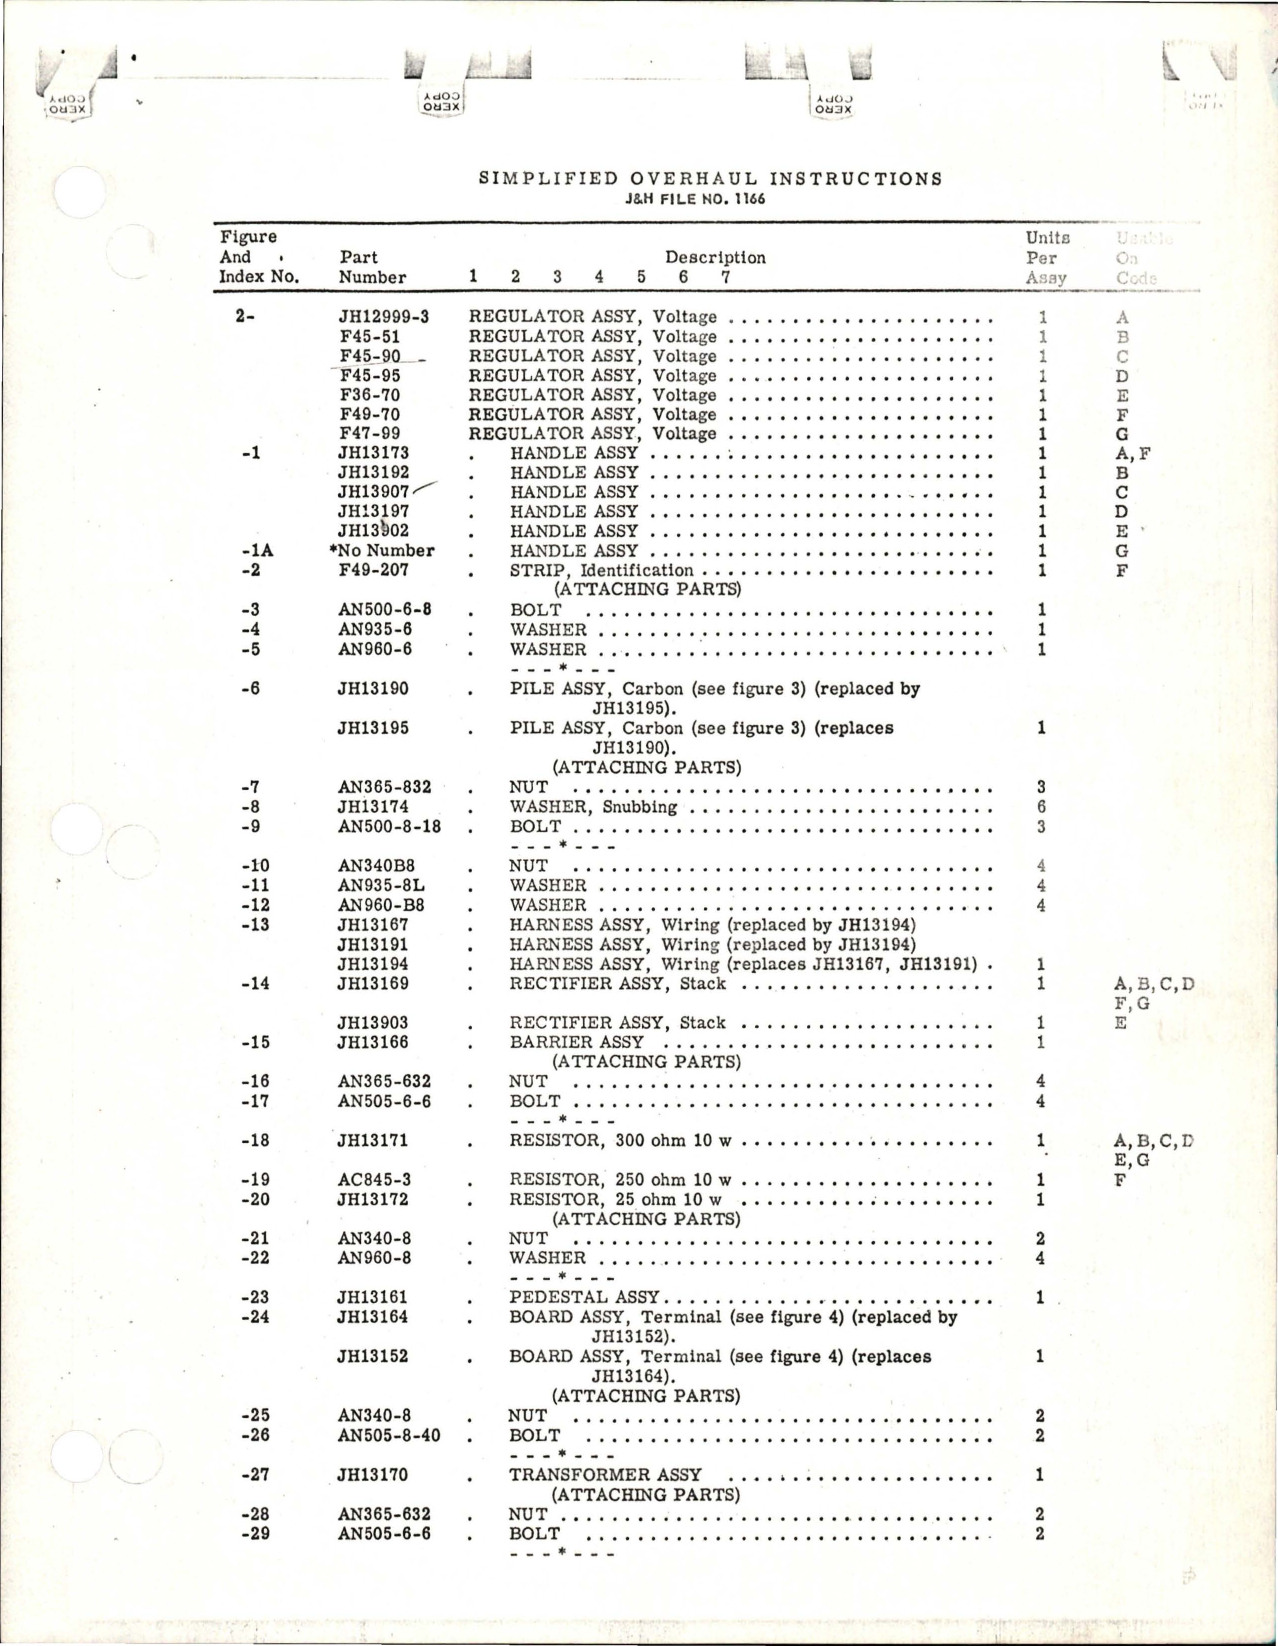 Sample page 5 from AirCorps Library document: Overhaul Instructions for Voltage Regulators - Models F36-70, F45-51, F45-90, F45-95, F47-99, F49-70, and JH12999-3 